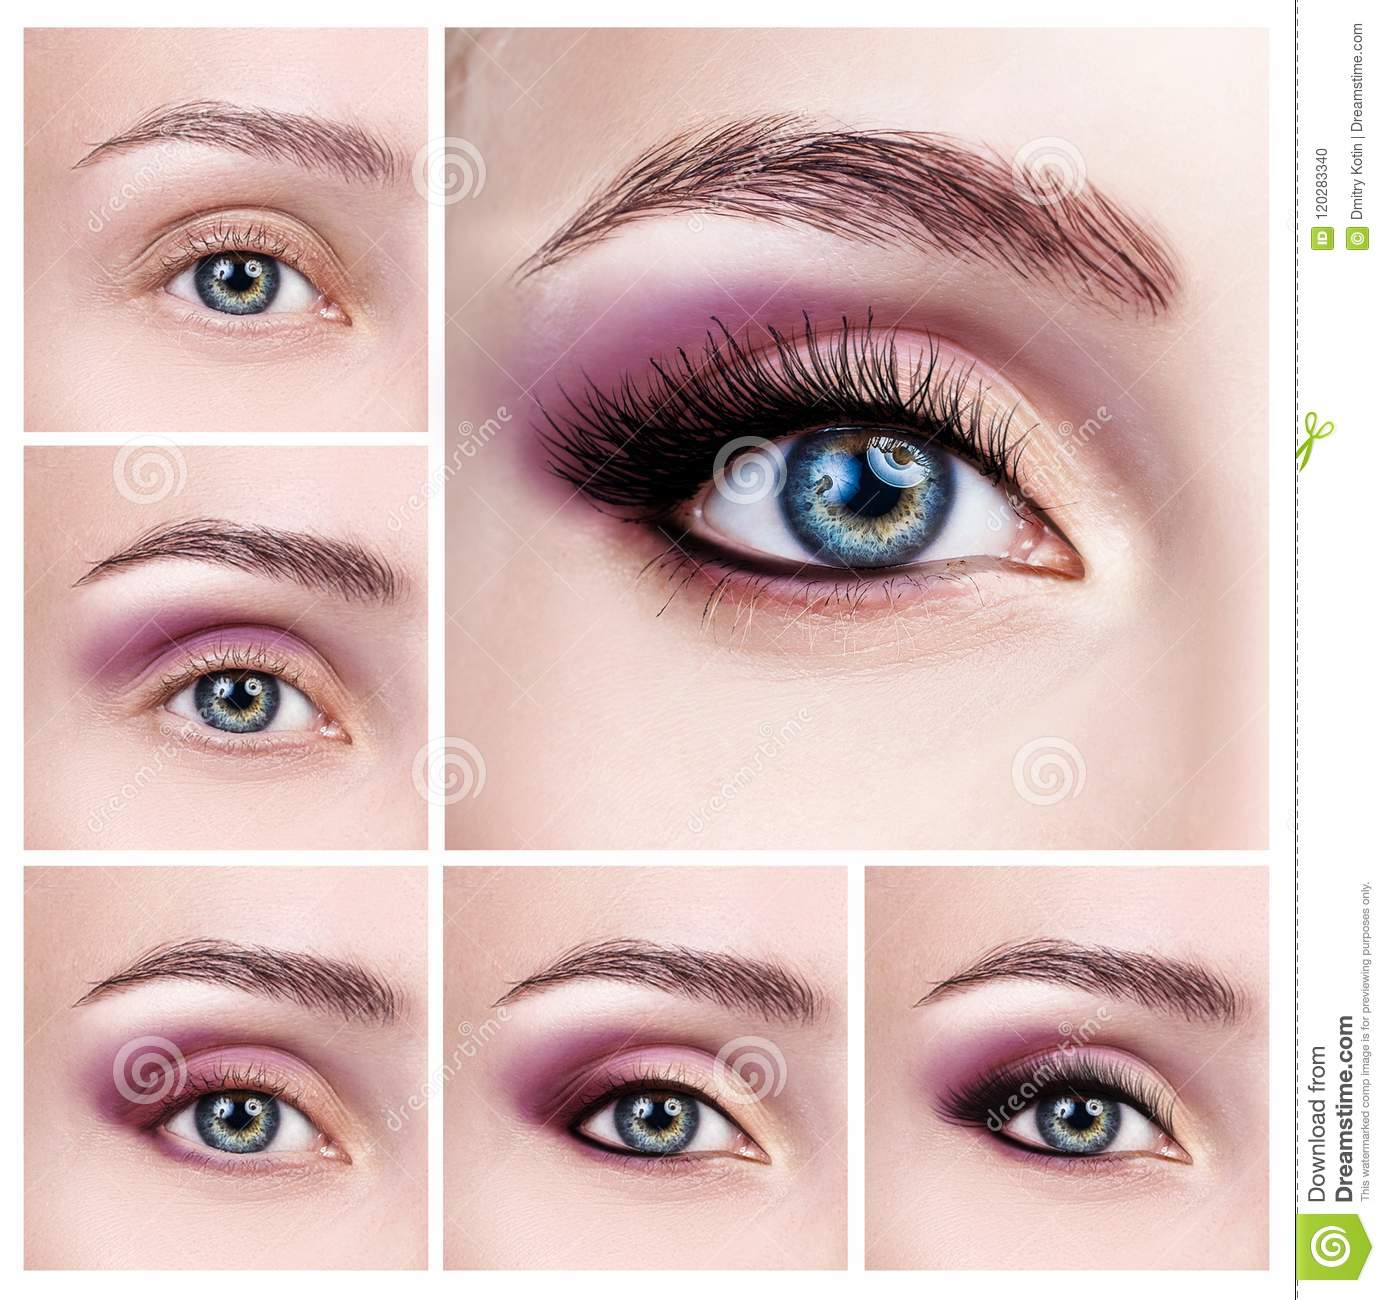 Eye Makeup Pics Step By Step Collage Of Female Eyes With Makeup Steps Stock Photo Image Of